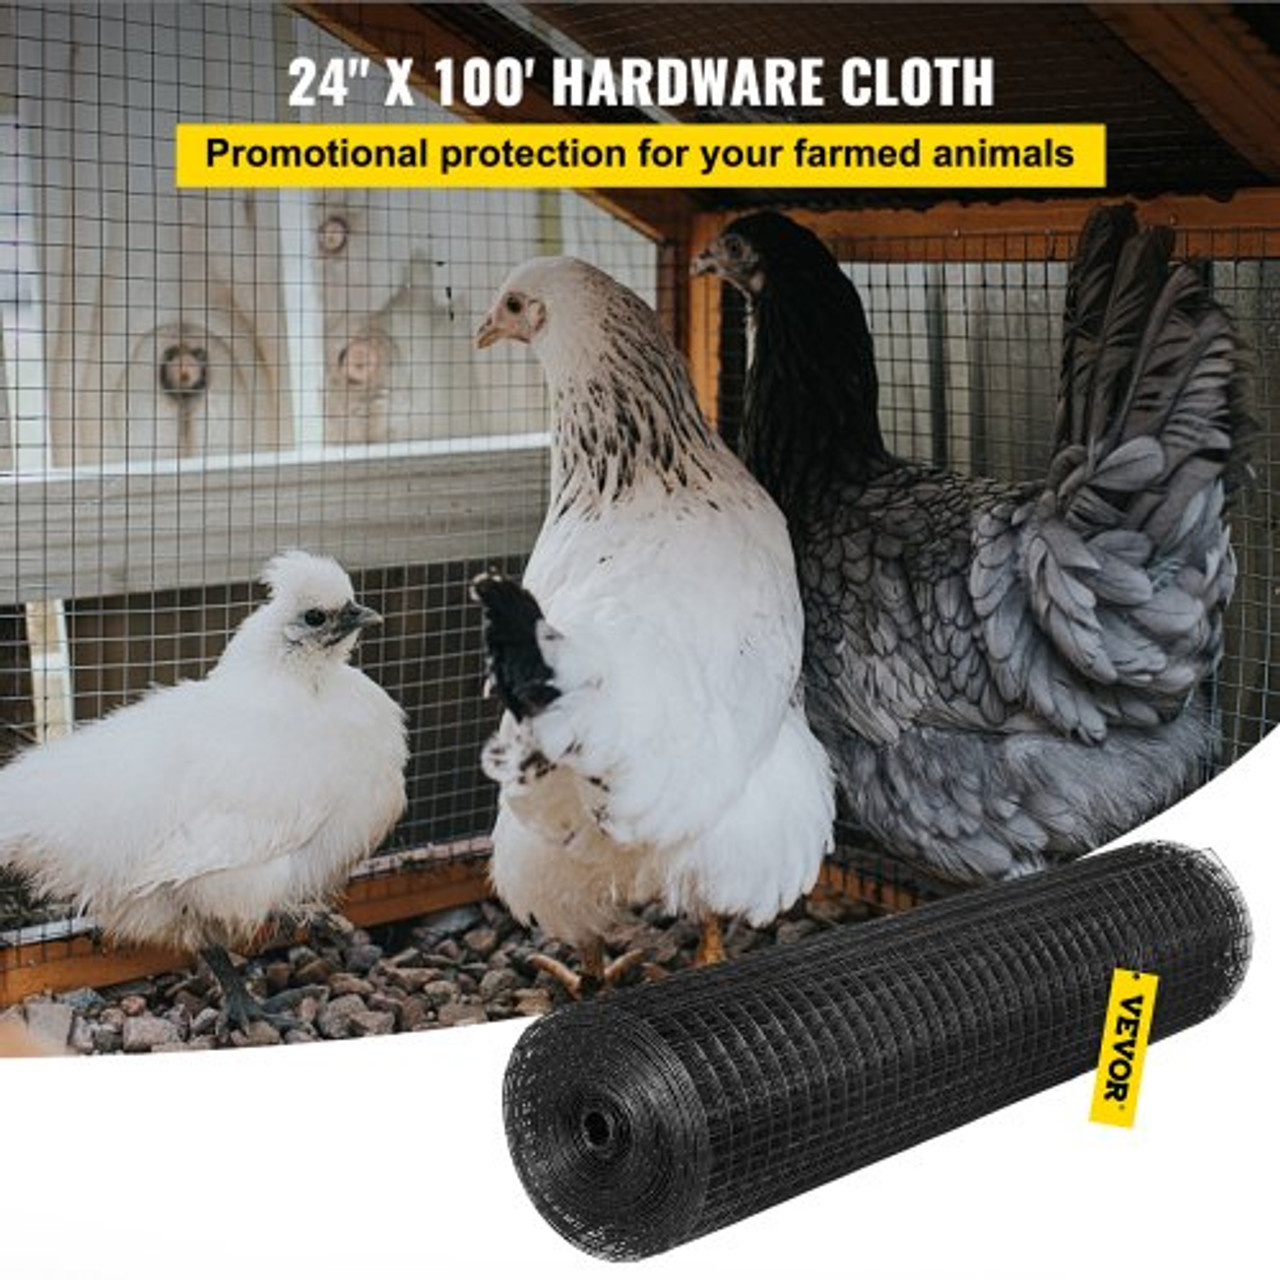 Hardware Cloth, 24" x 100' & 1"x1" Mesh Size, Galvanized Steel Vinyl Coated 16 Gauge Chicken Wire Fencing w/A Cutting Plier & A Pair of Fabric Gloves, for Garden Fencing & Pet Enclosures, Black